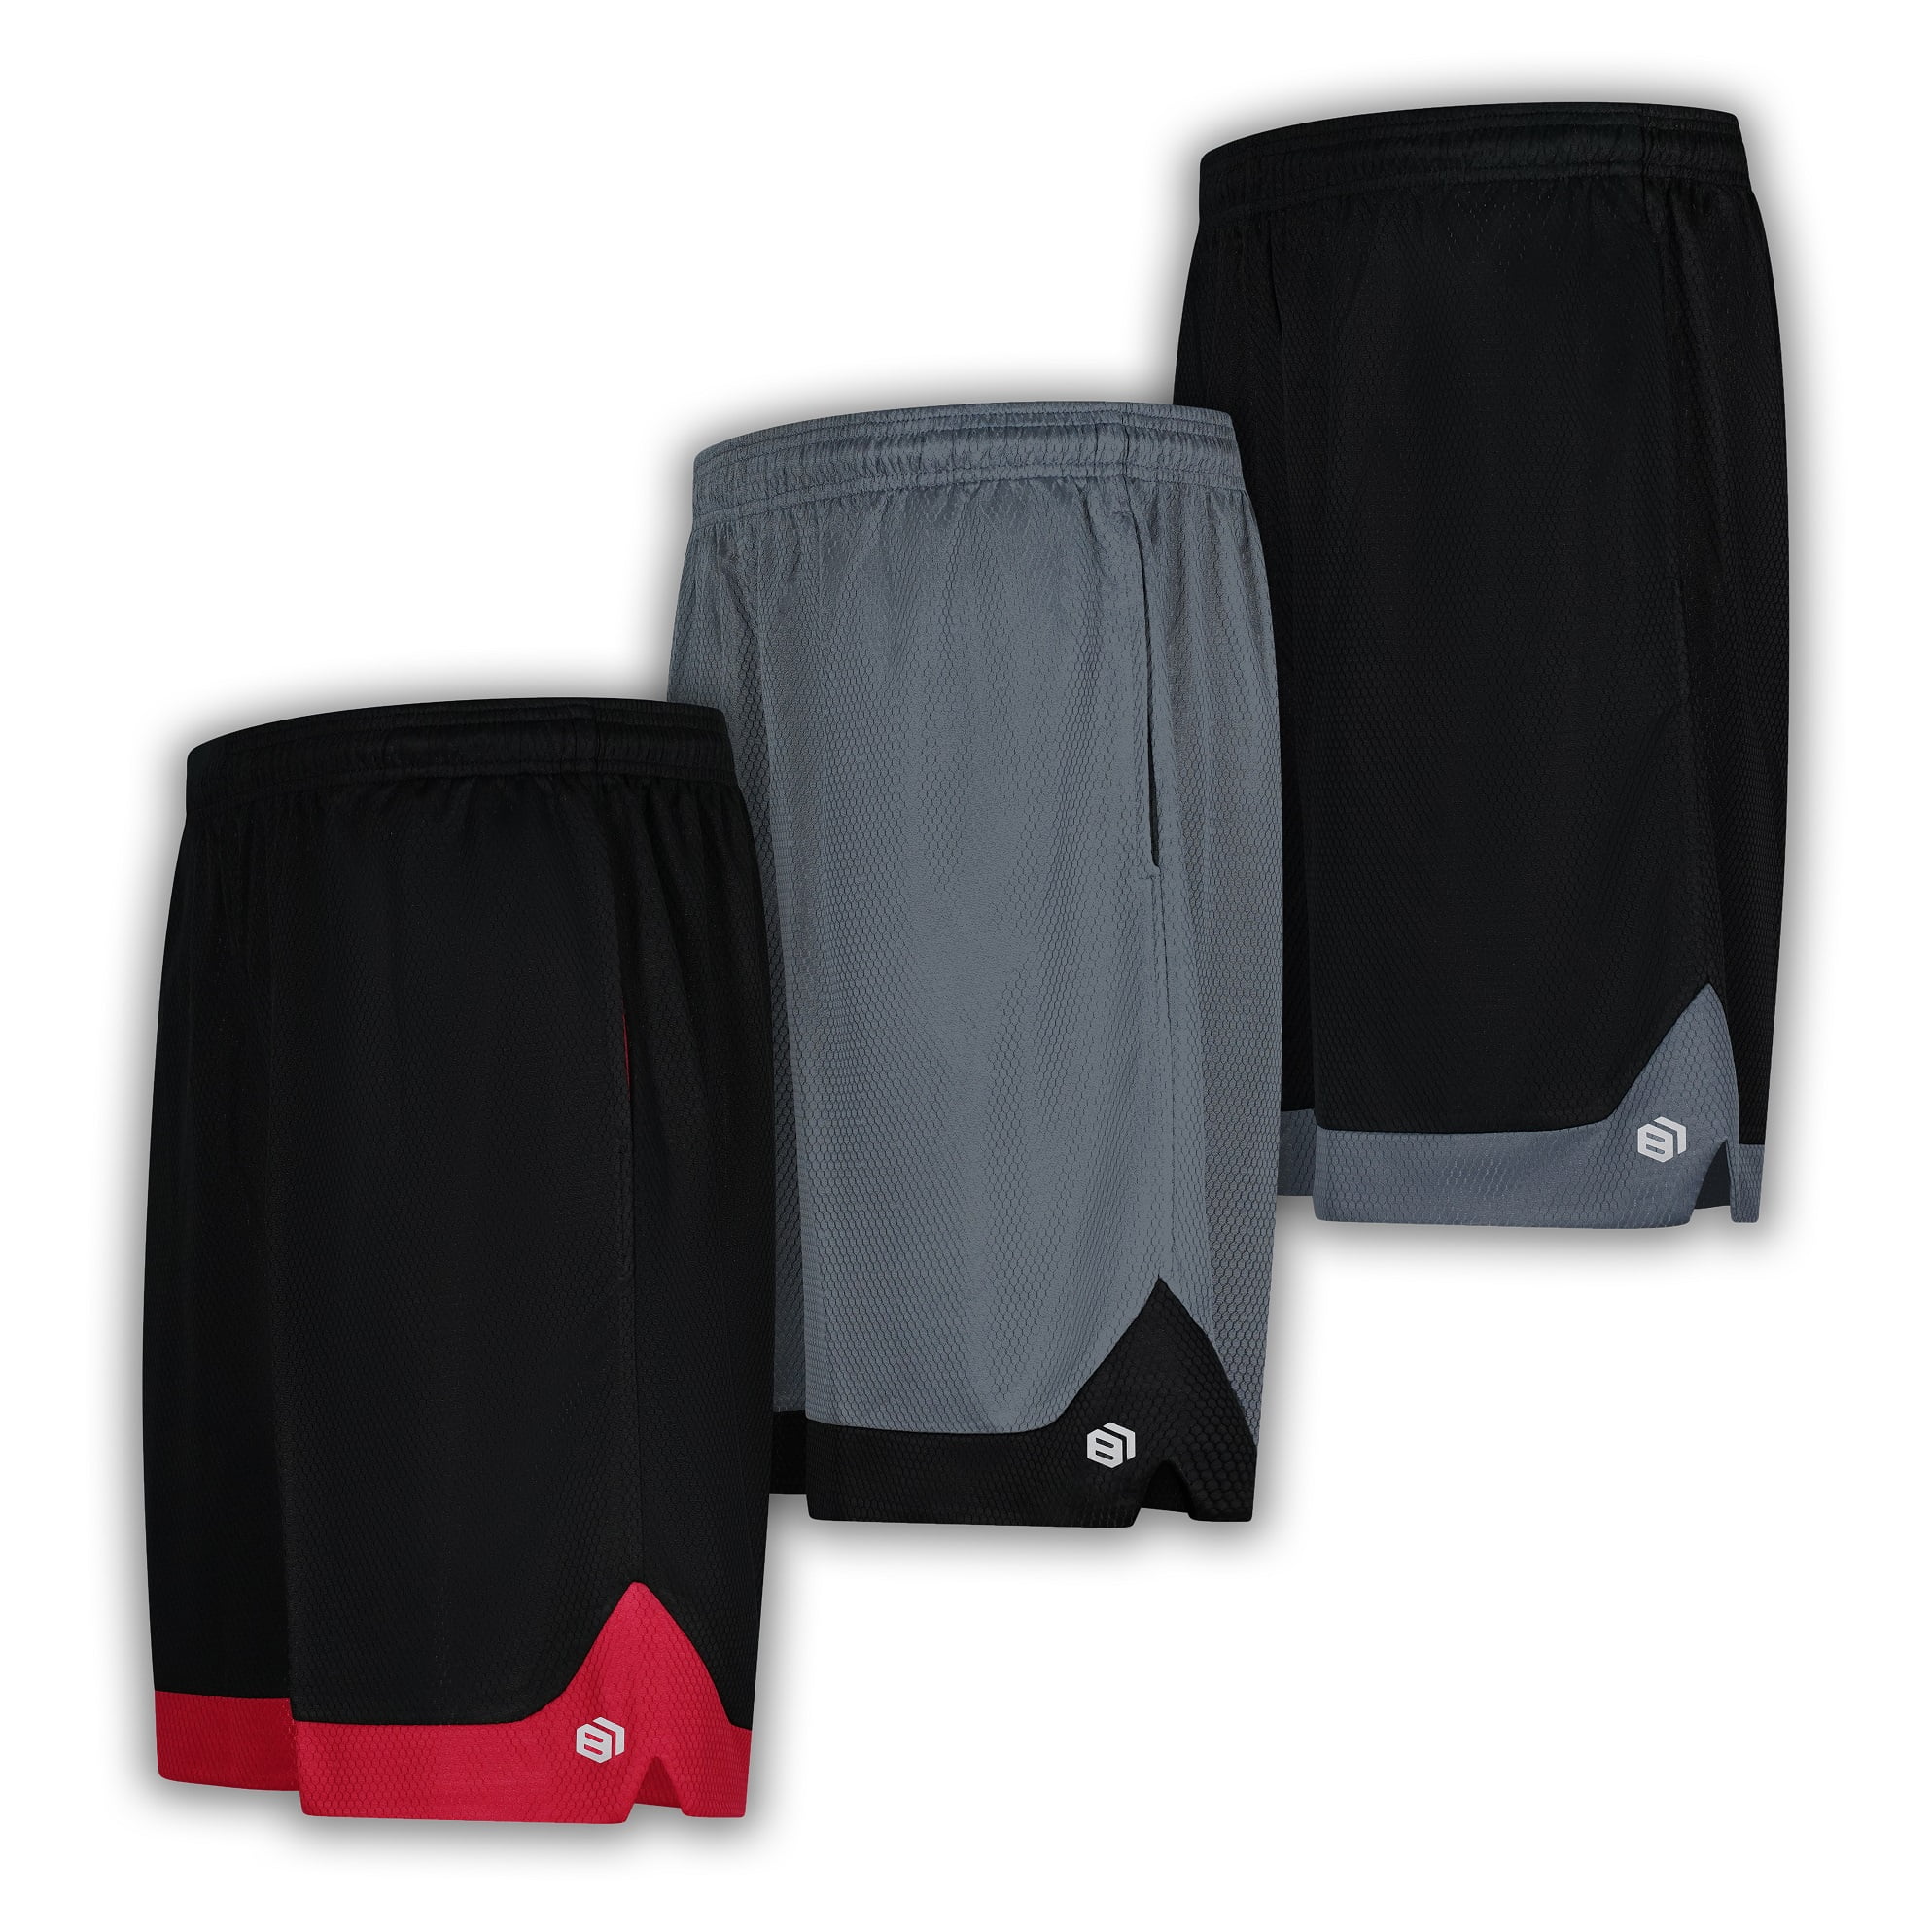 Boys Premium Active Athletic Performance Shorts with Pockets 3 Pack